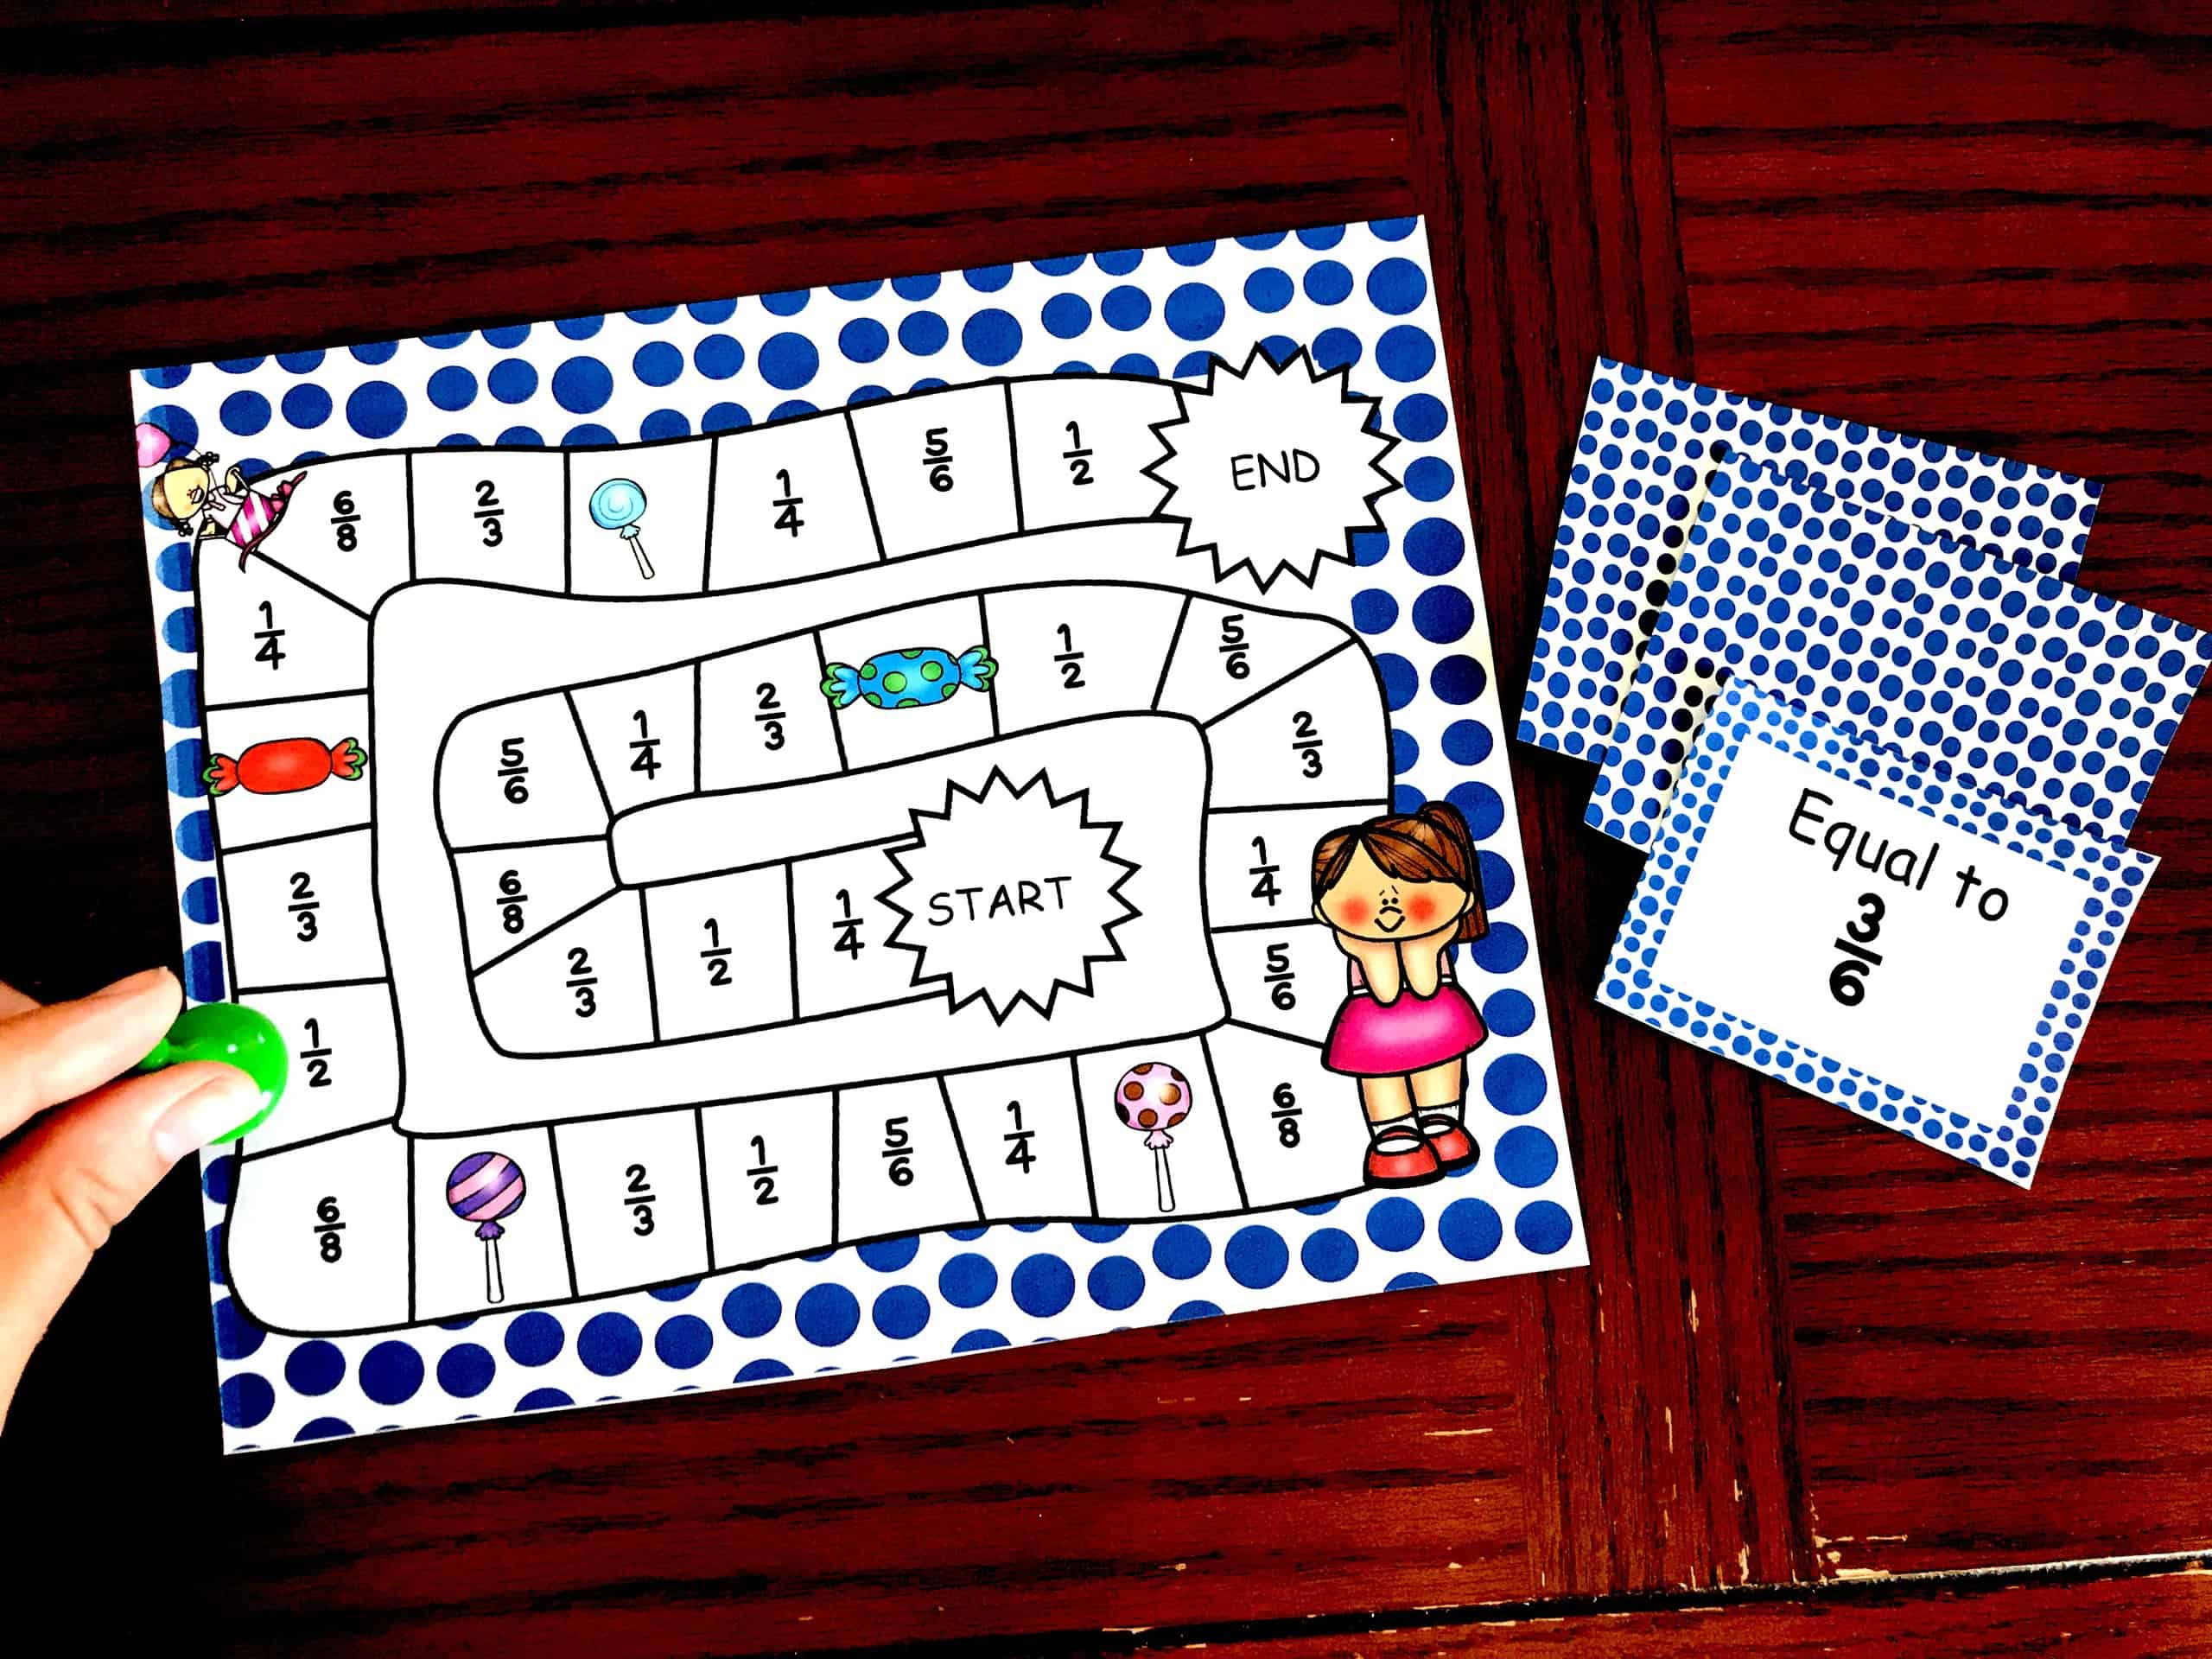 Here’s a Comparing Fractions Game To Help Children Practice In A Fun Way